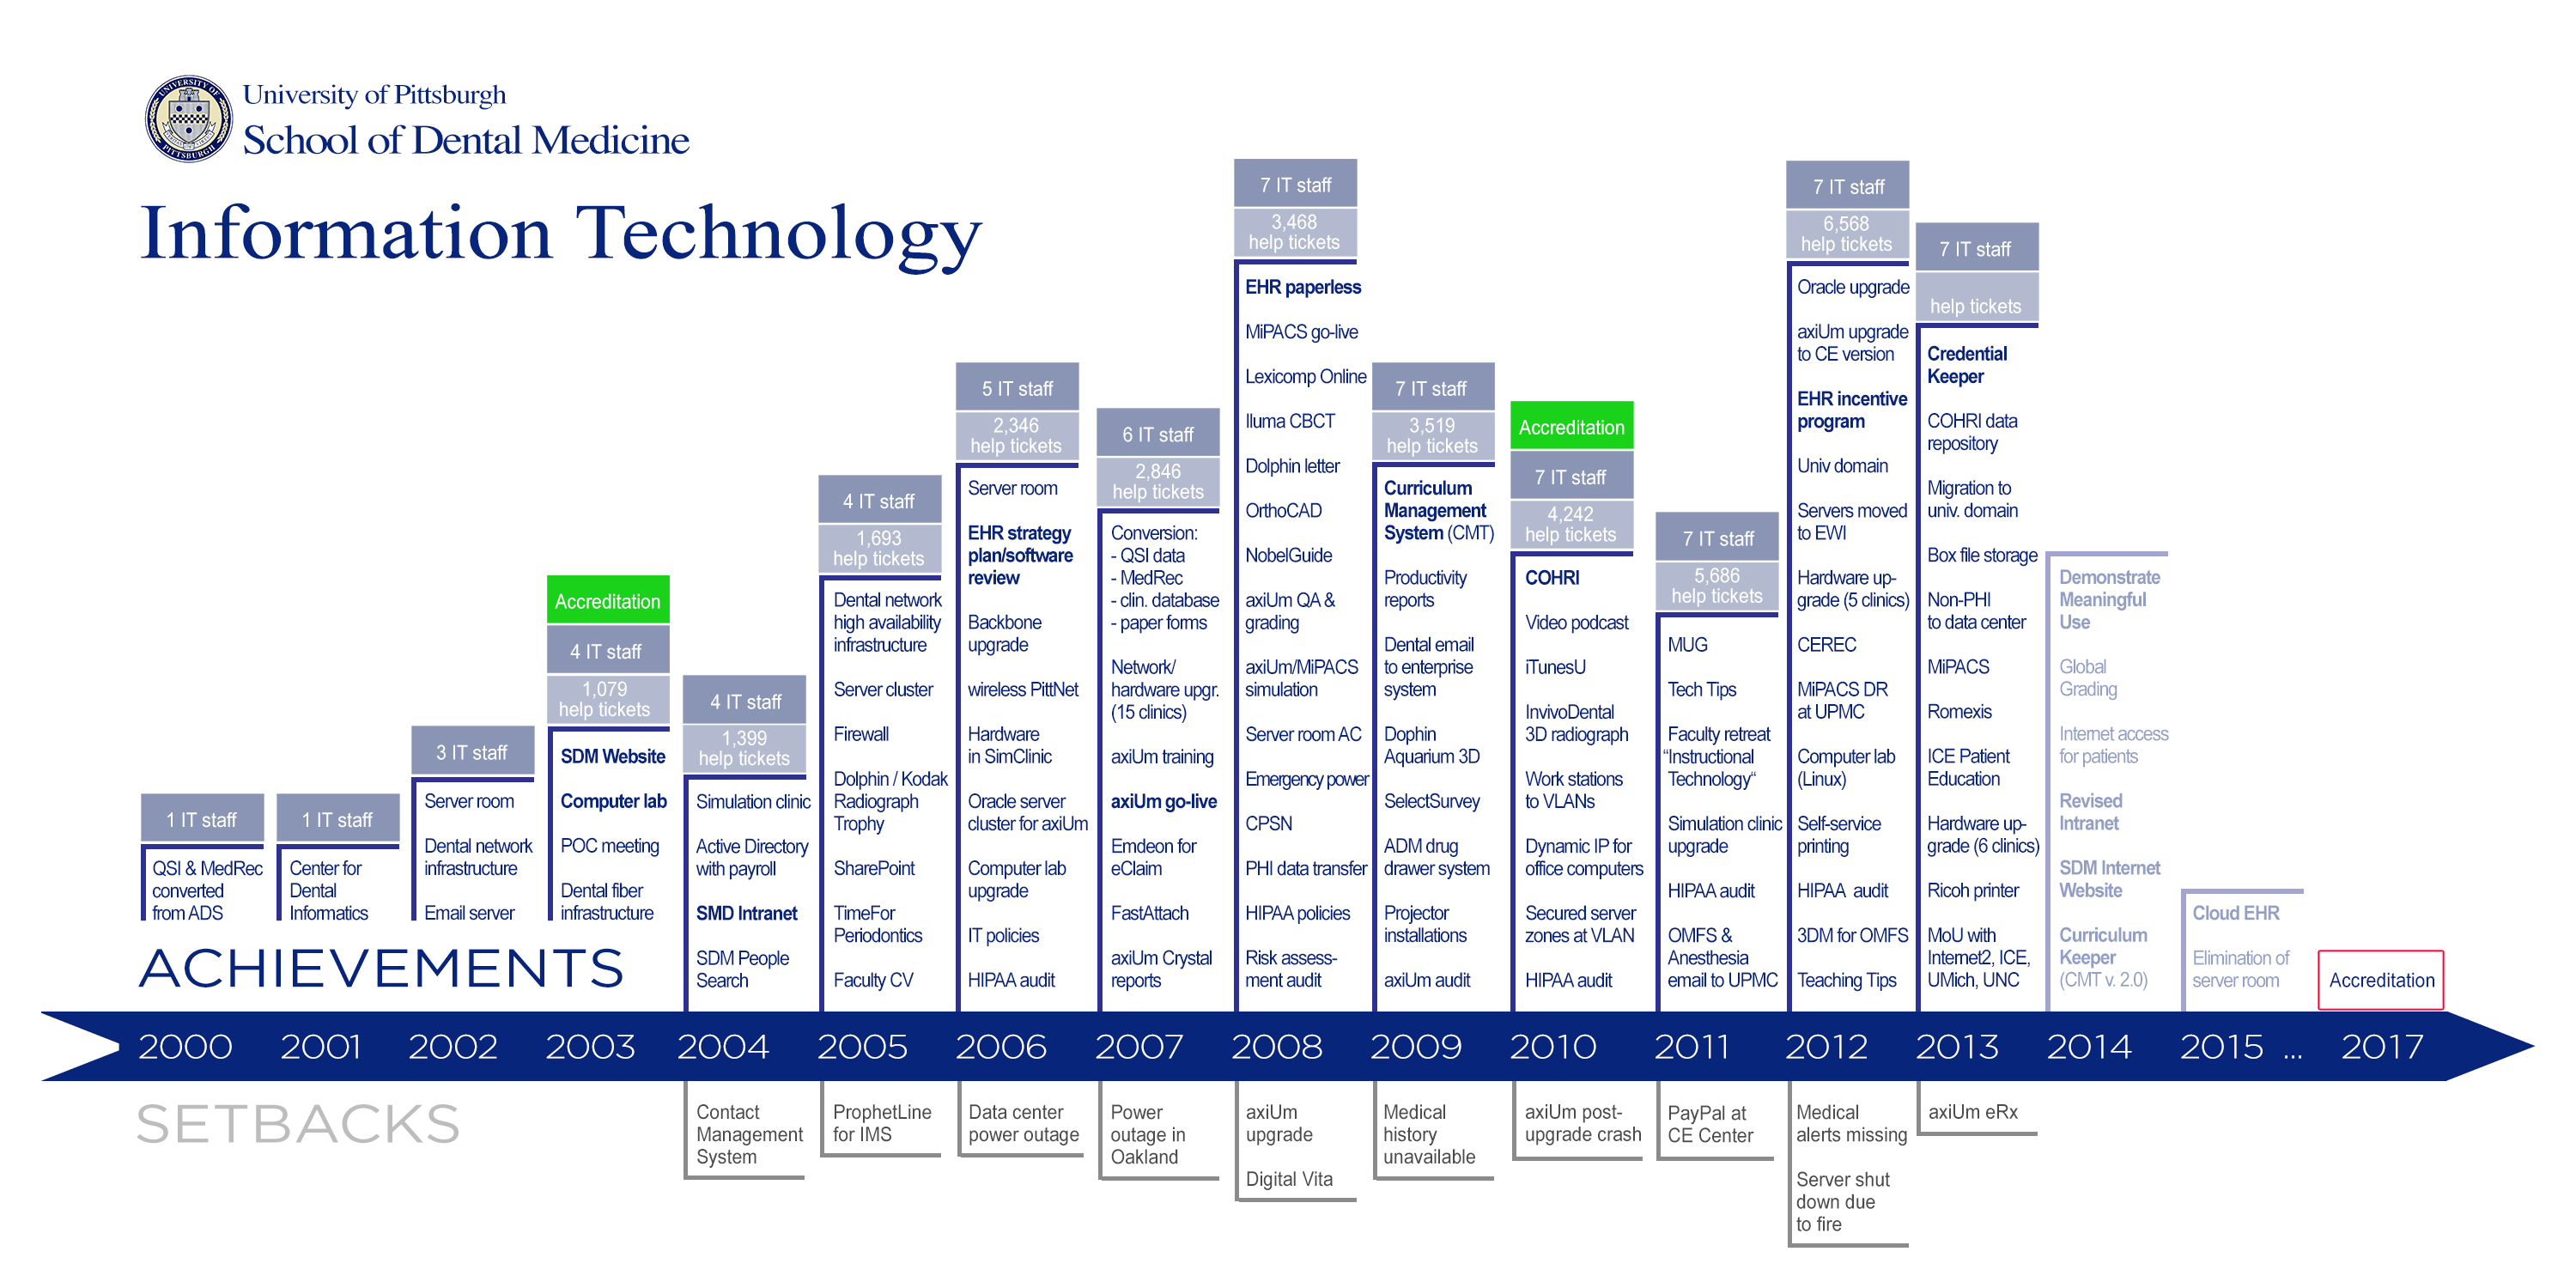 advancement in technology timeline